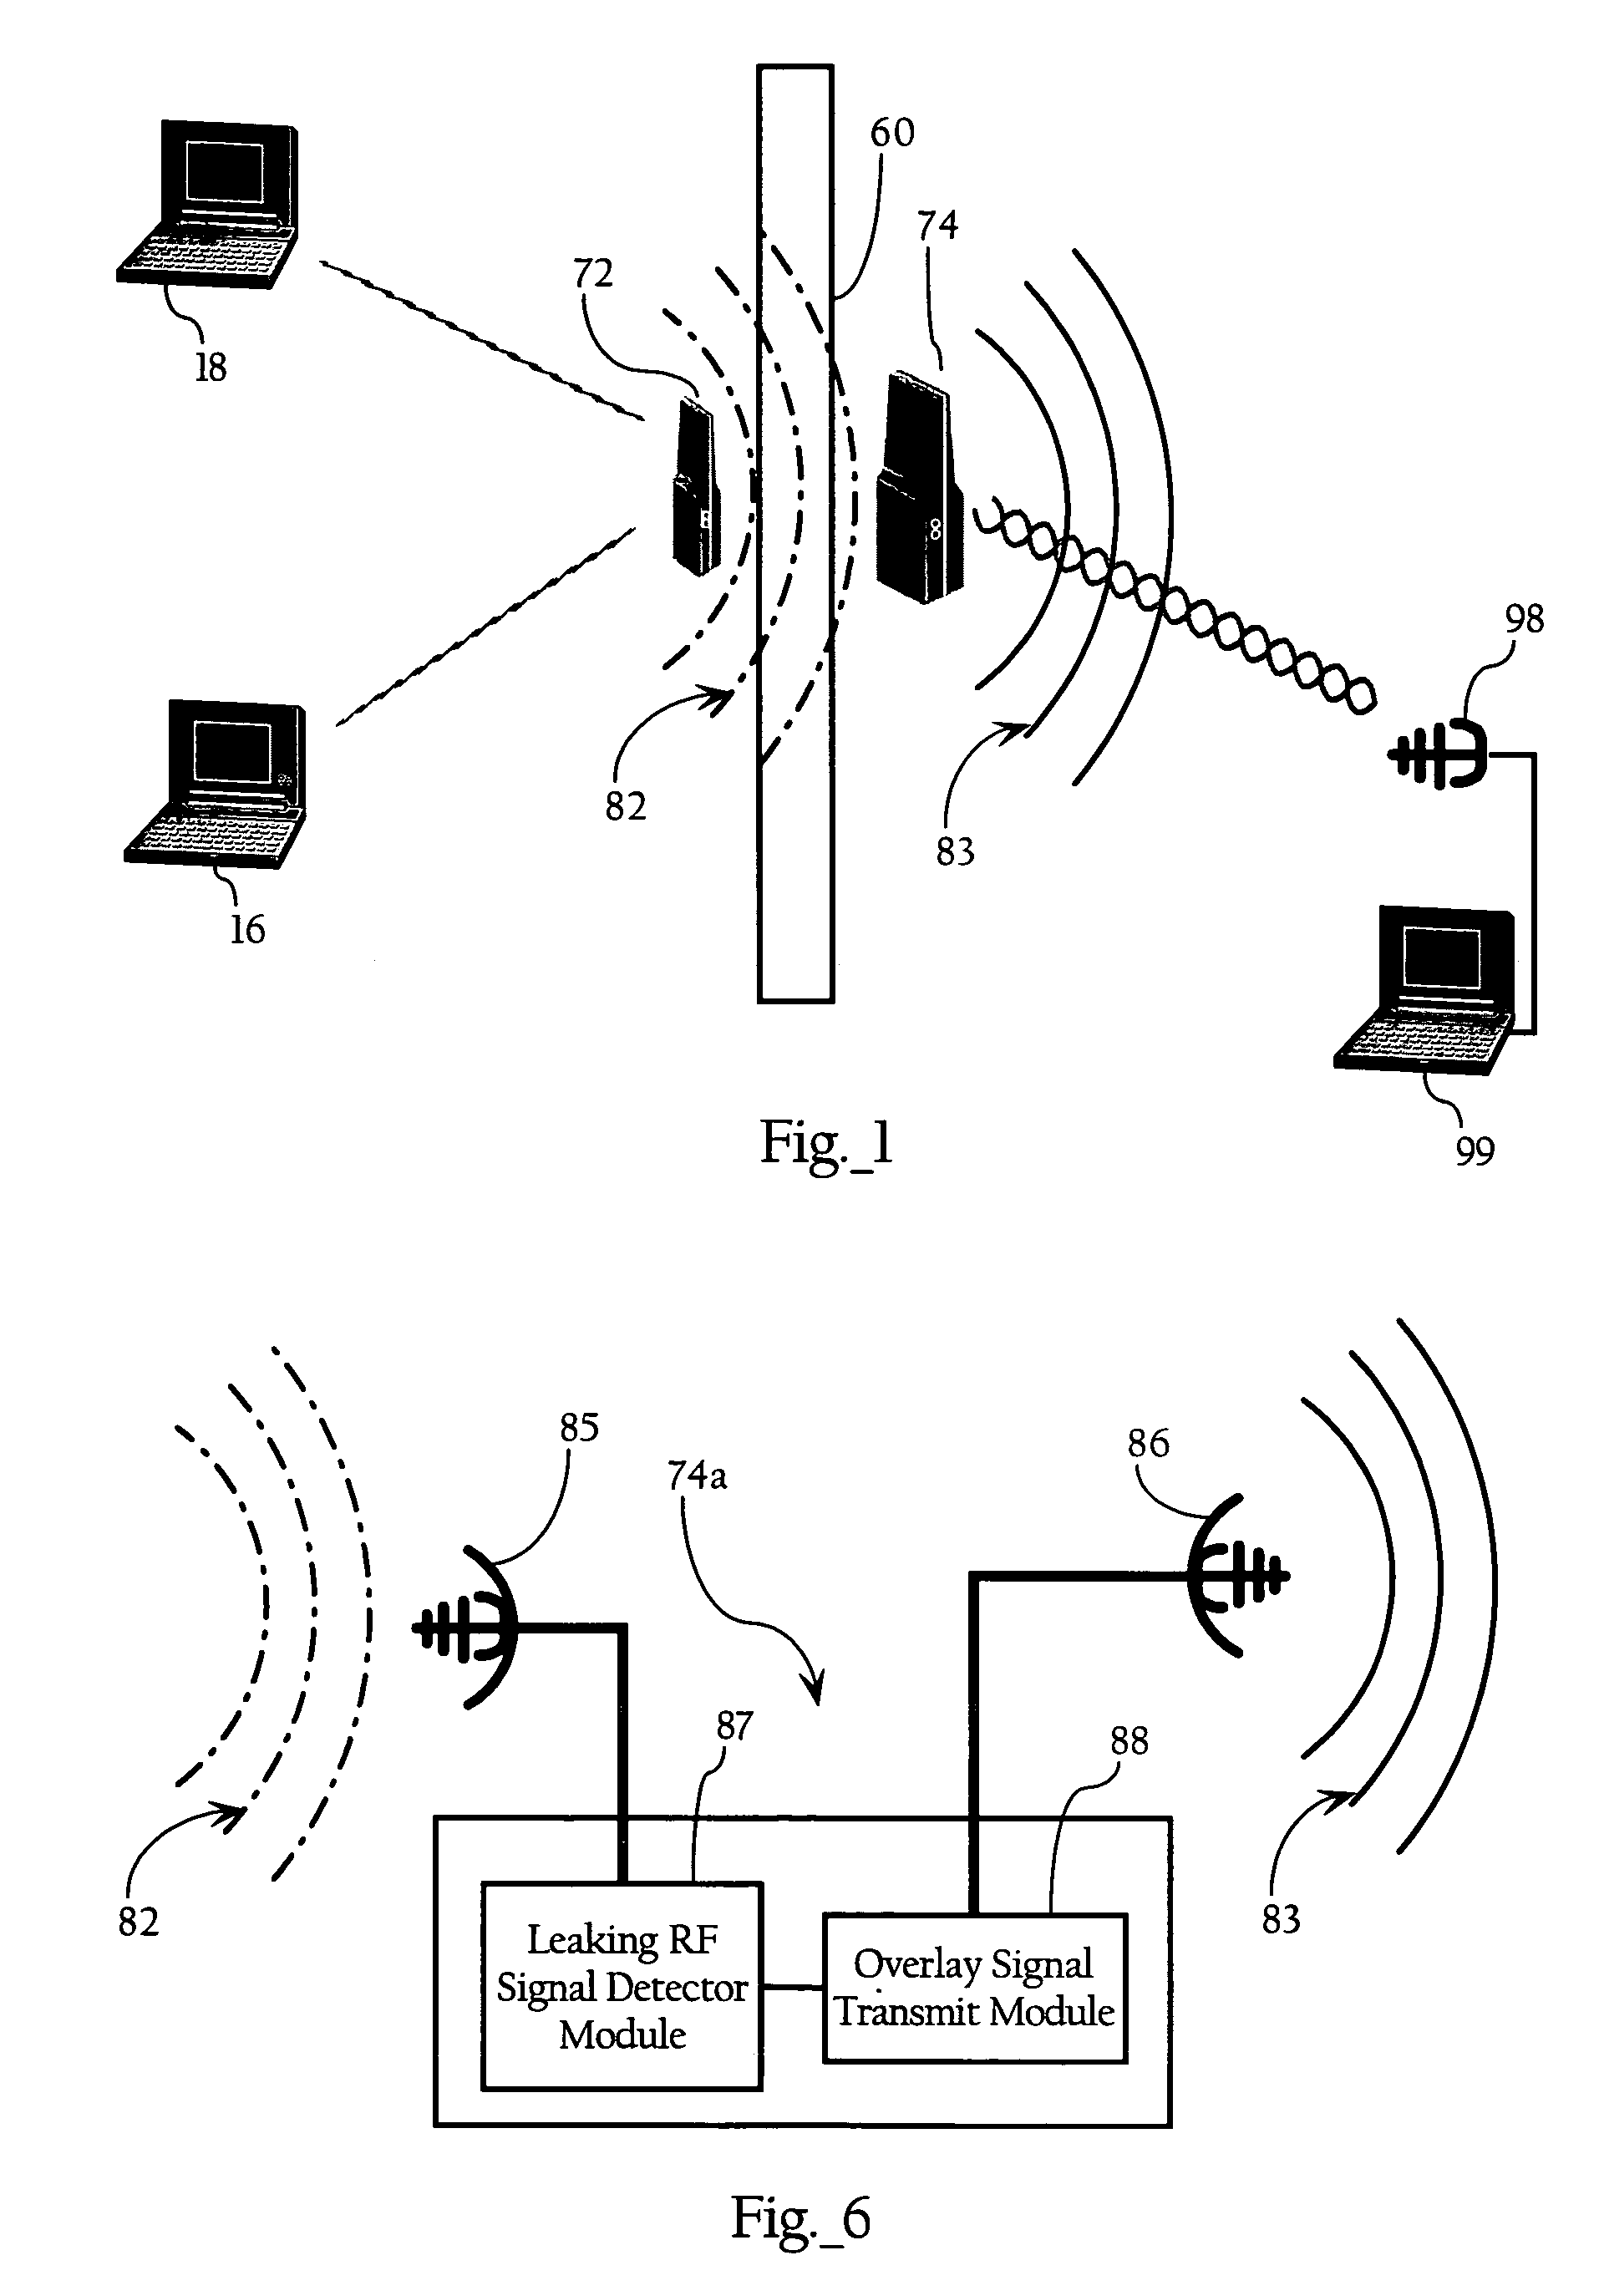 Wireless network perimeter security system using overlaying radio frequency signals